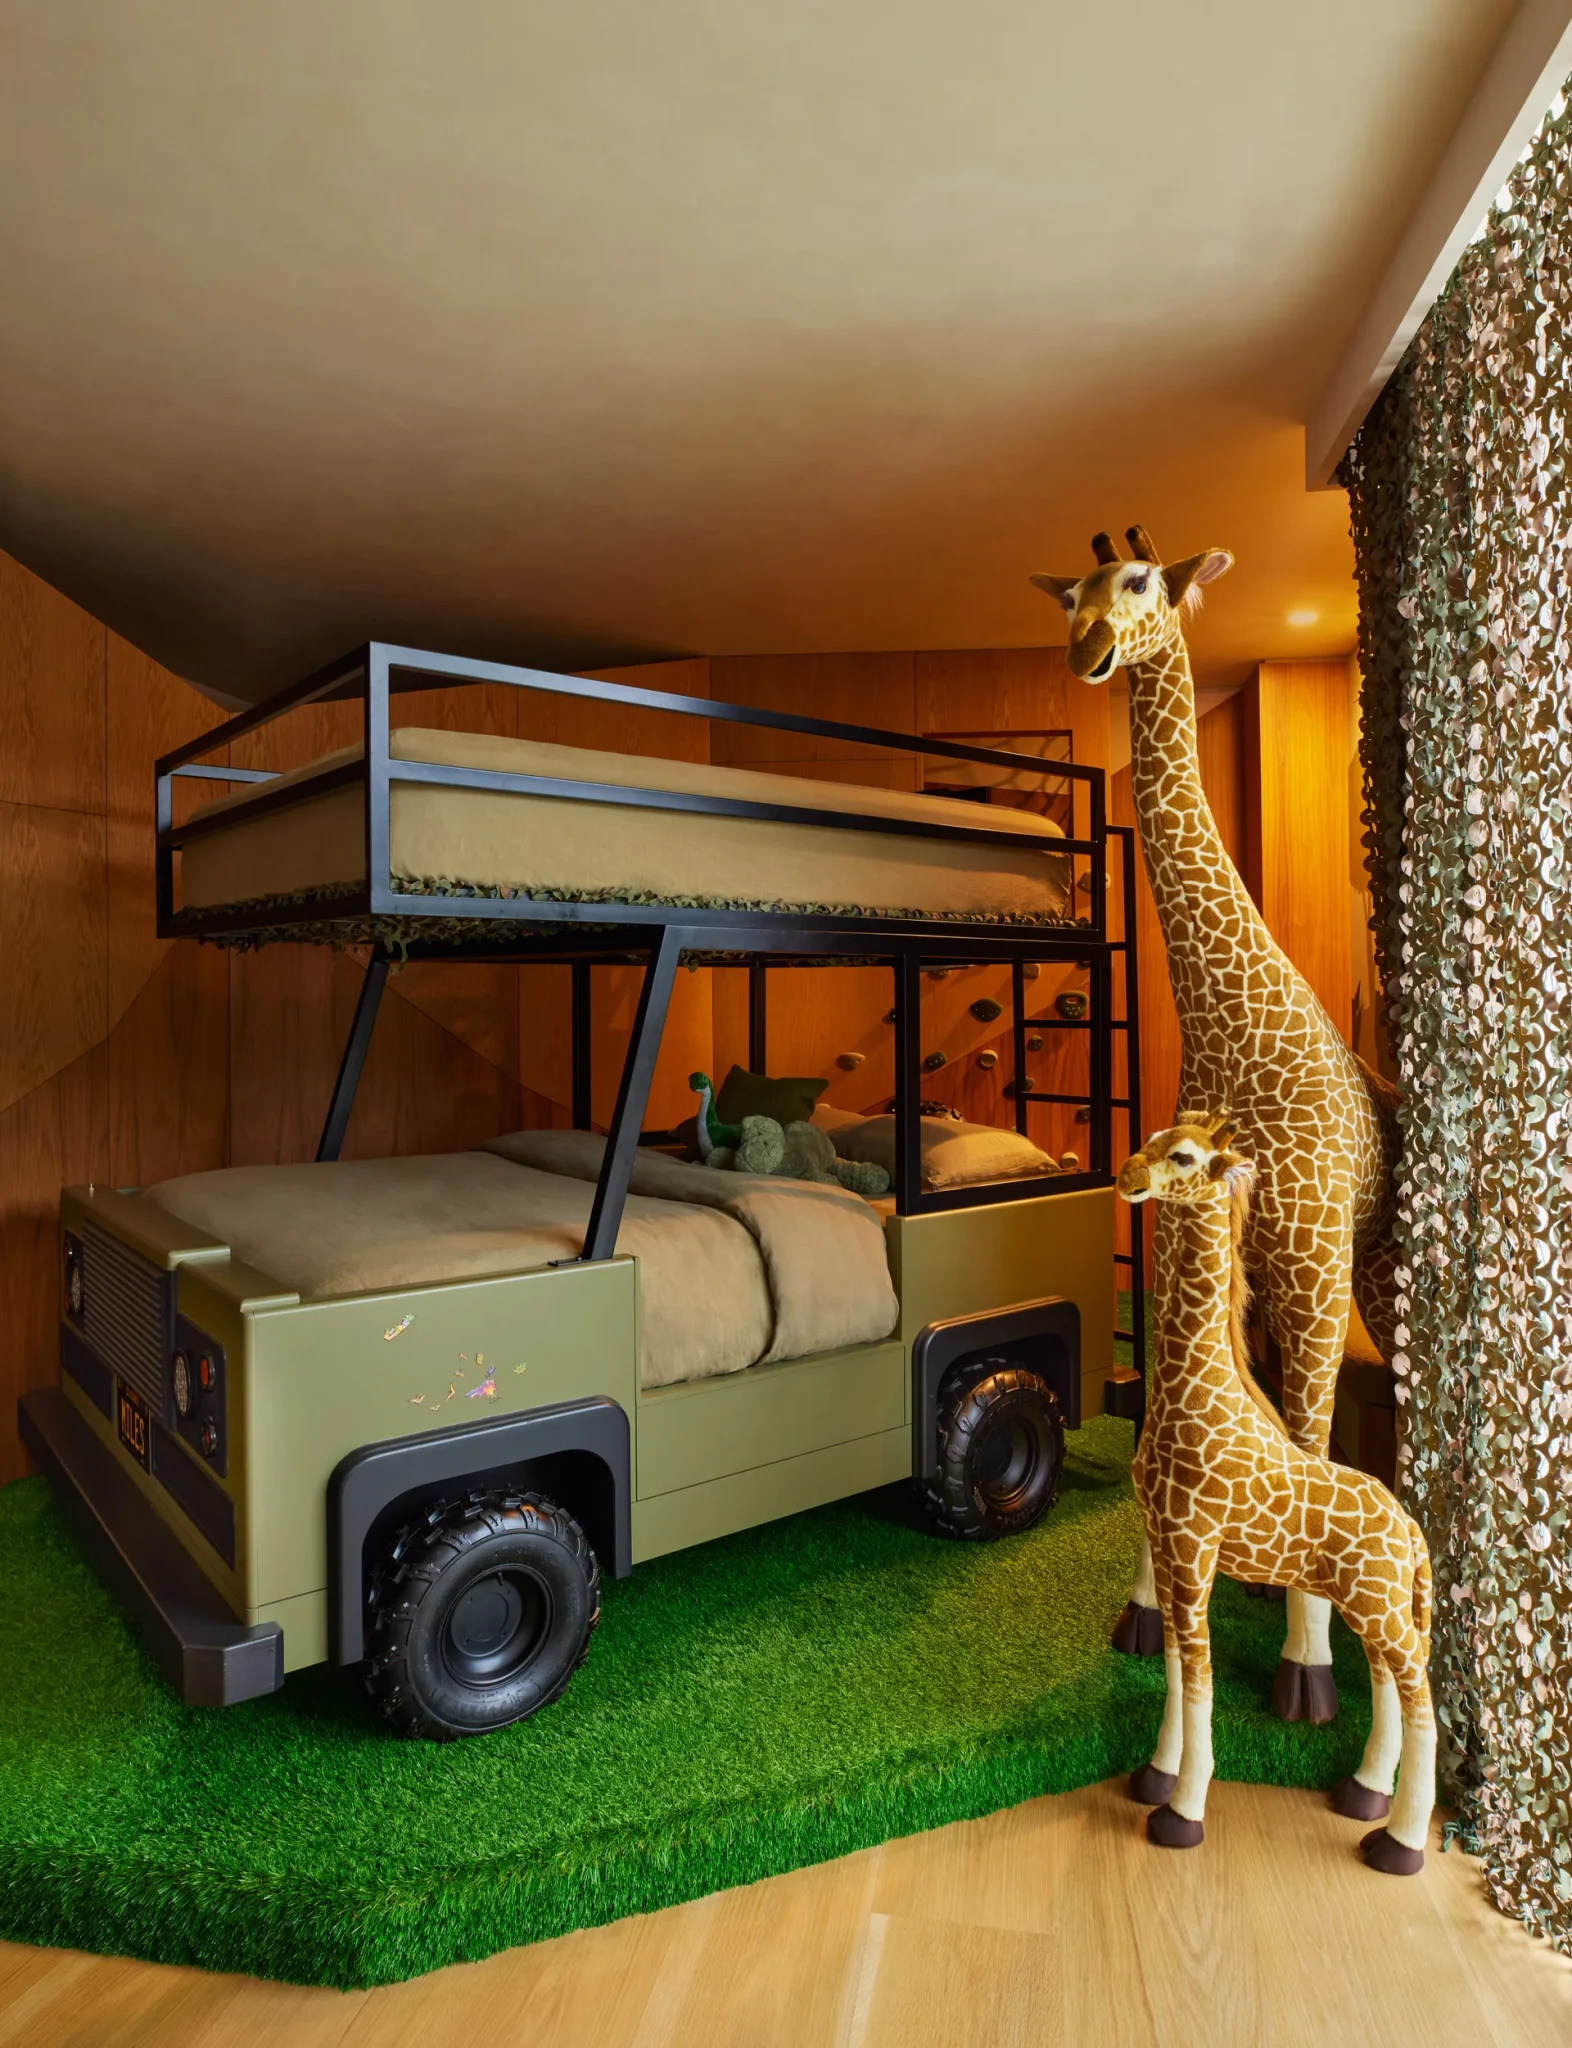 Miles’s bedroom features a custom car bed with operable lights, a climbing wall, and curtains of camouflage netting